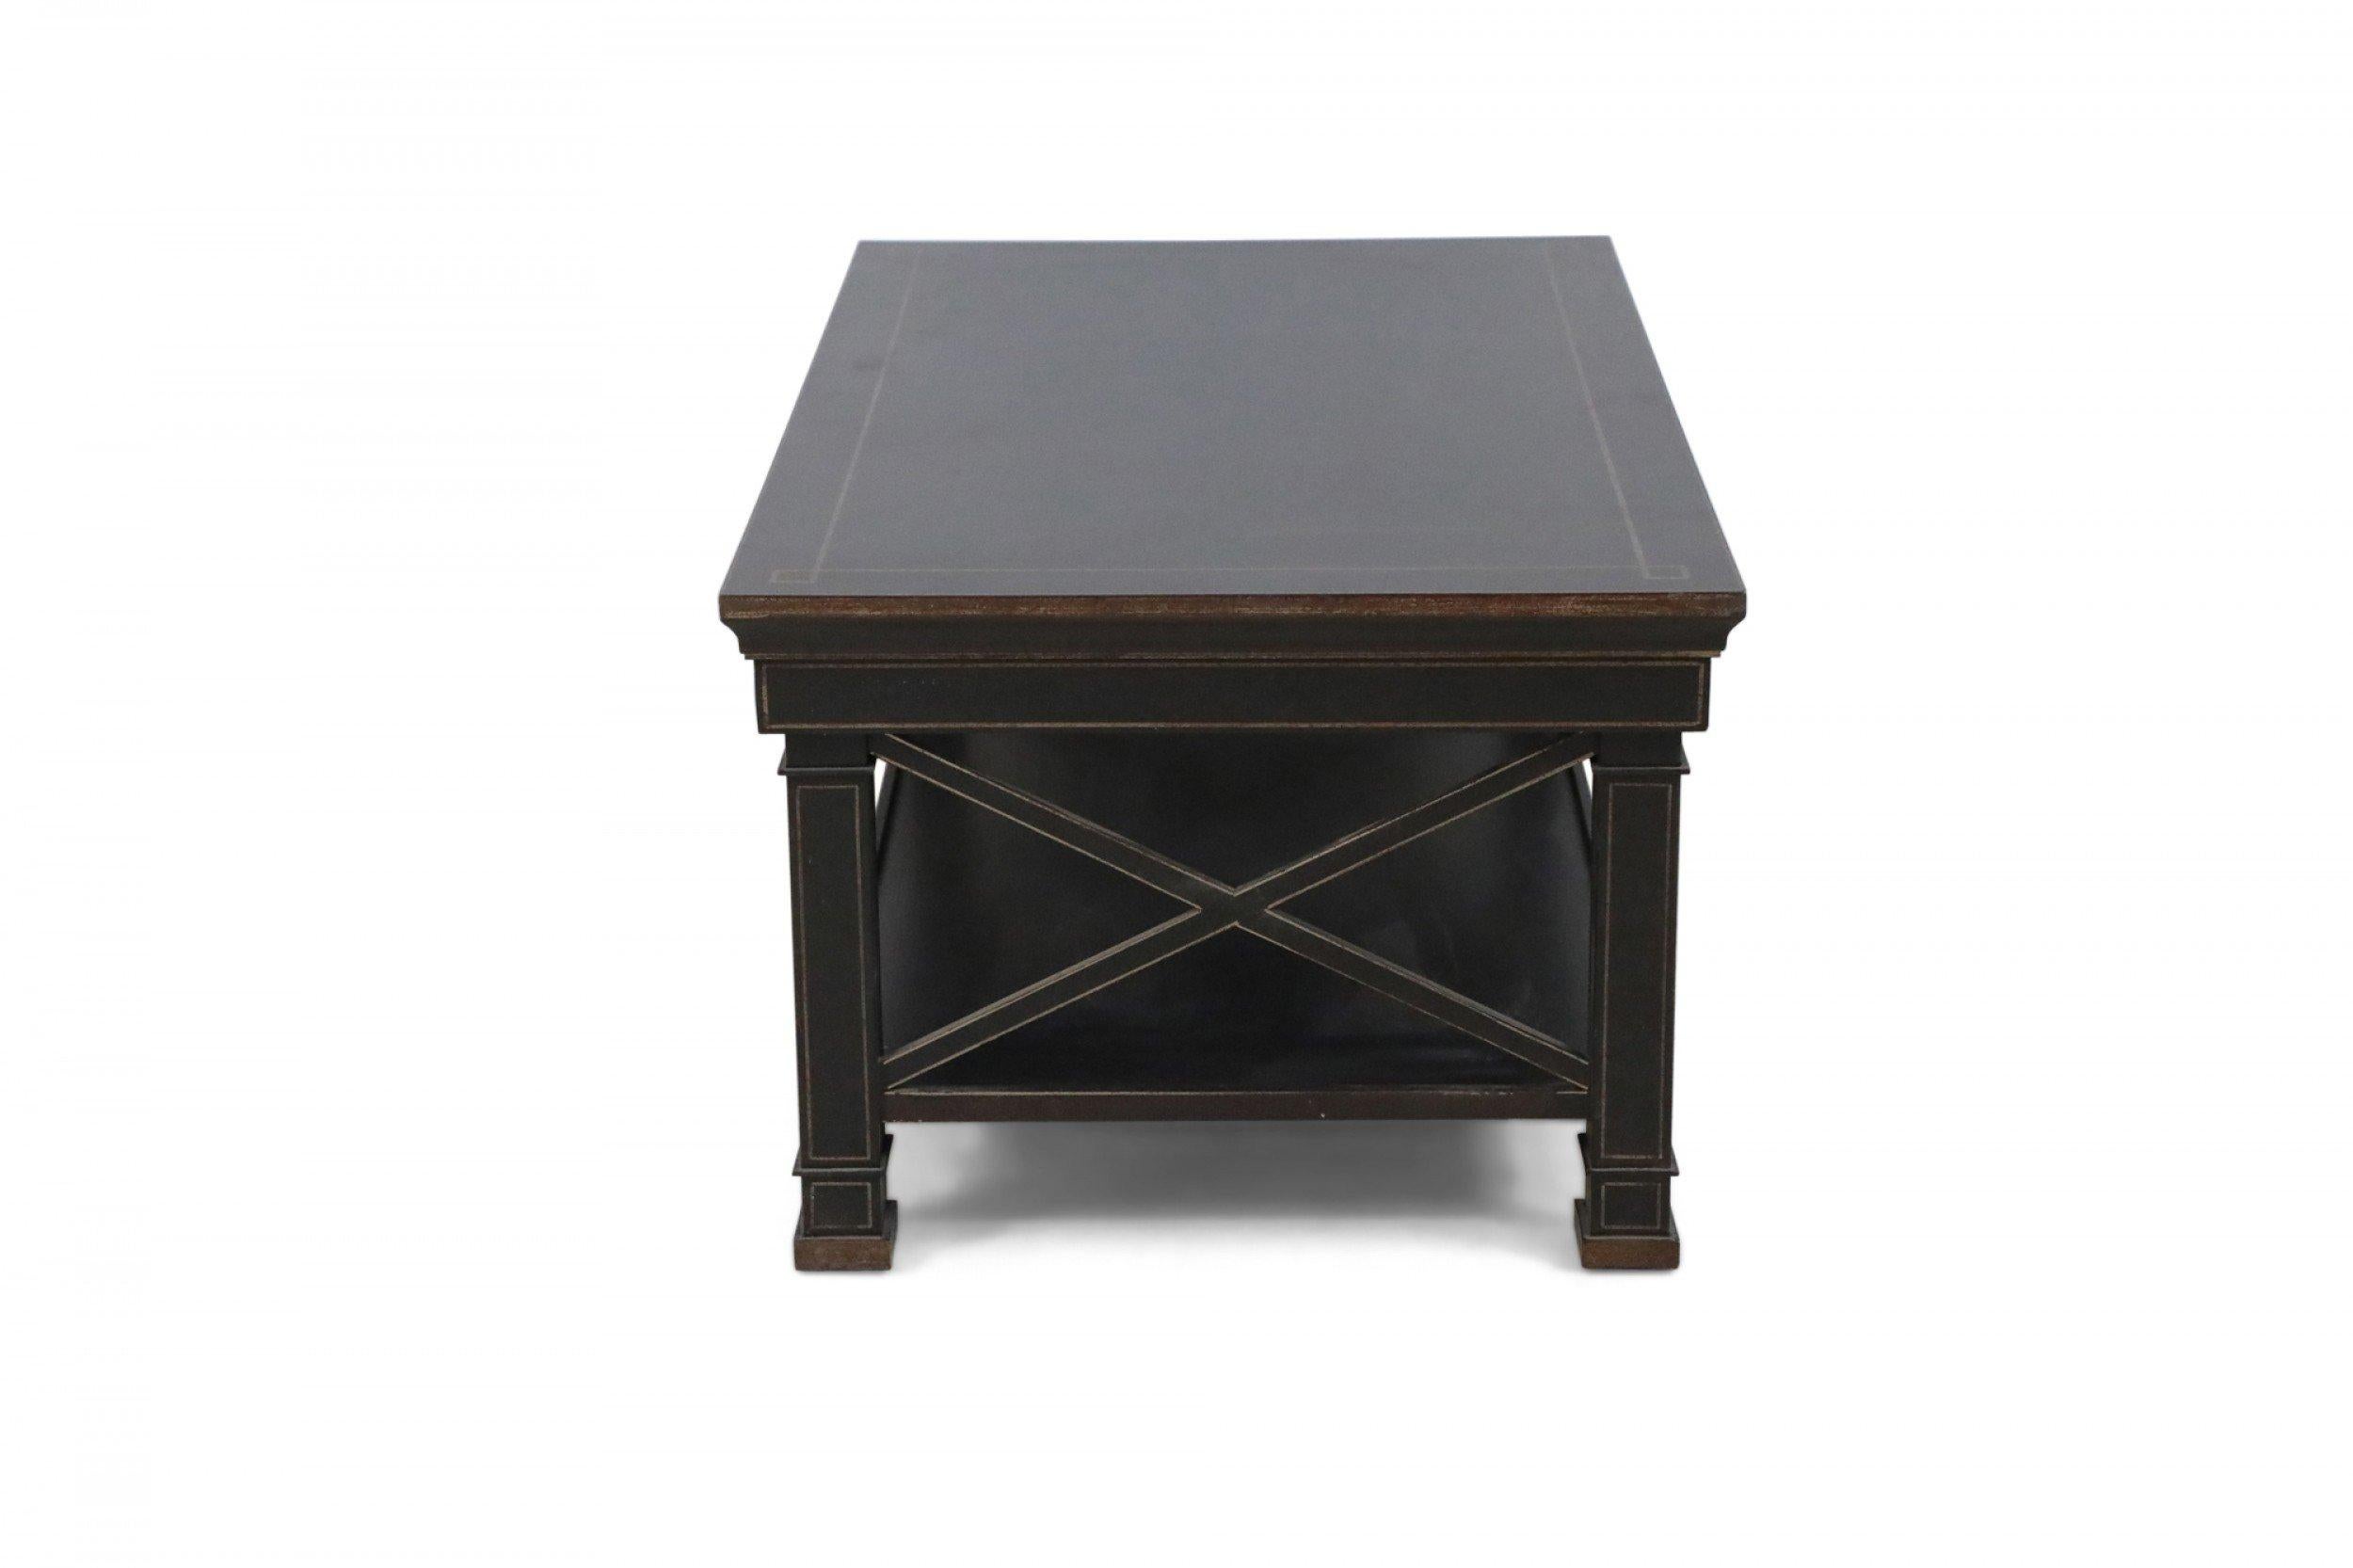 English Chinese-Chippendale-style (modern) wooden coffee table with an espresso finish and rectangular shape traced in a thin, light-brown border, a bottom stretcher shelf, and x-shaped supports on each side.
  